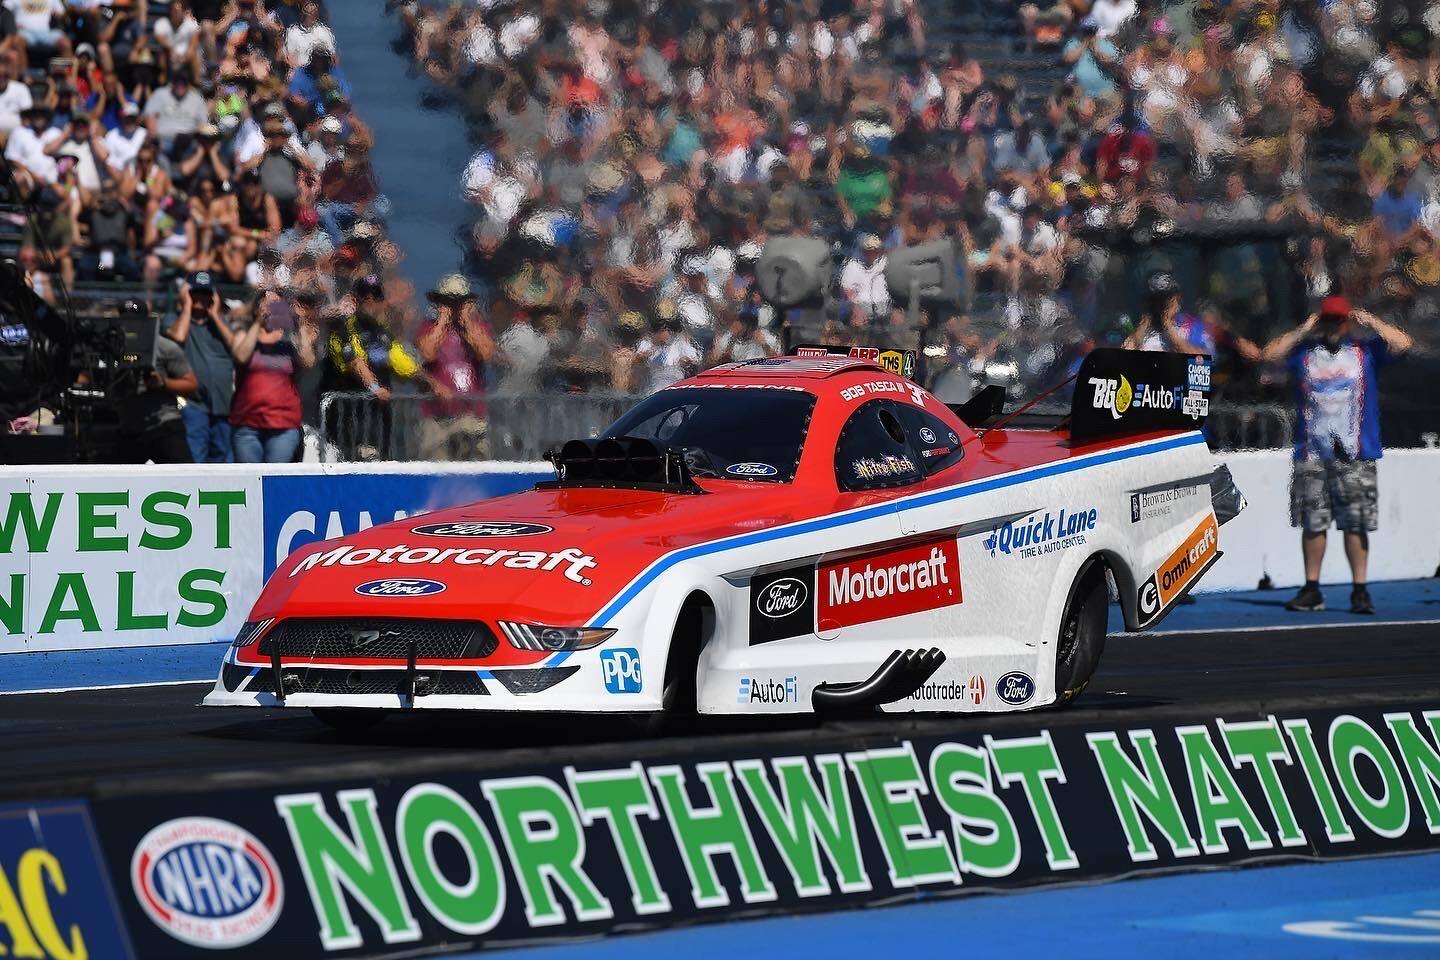 Tasca was the top Funny Car qualifier at the event, with Wilkerson ninth. 